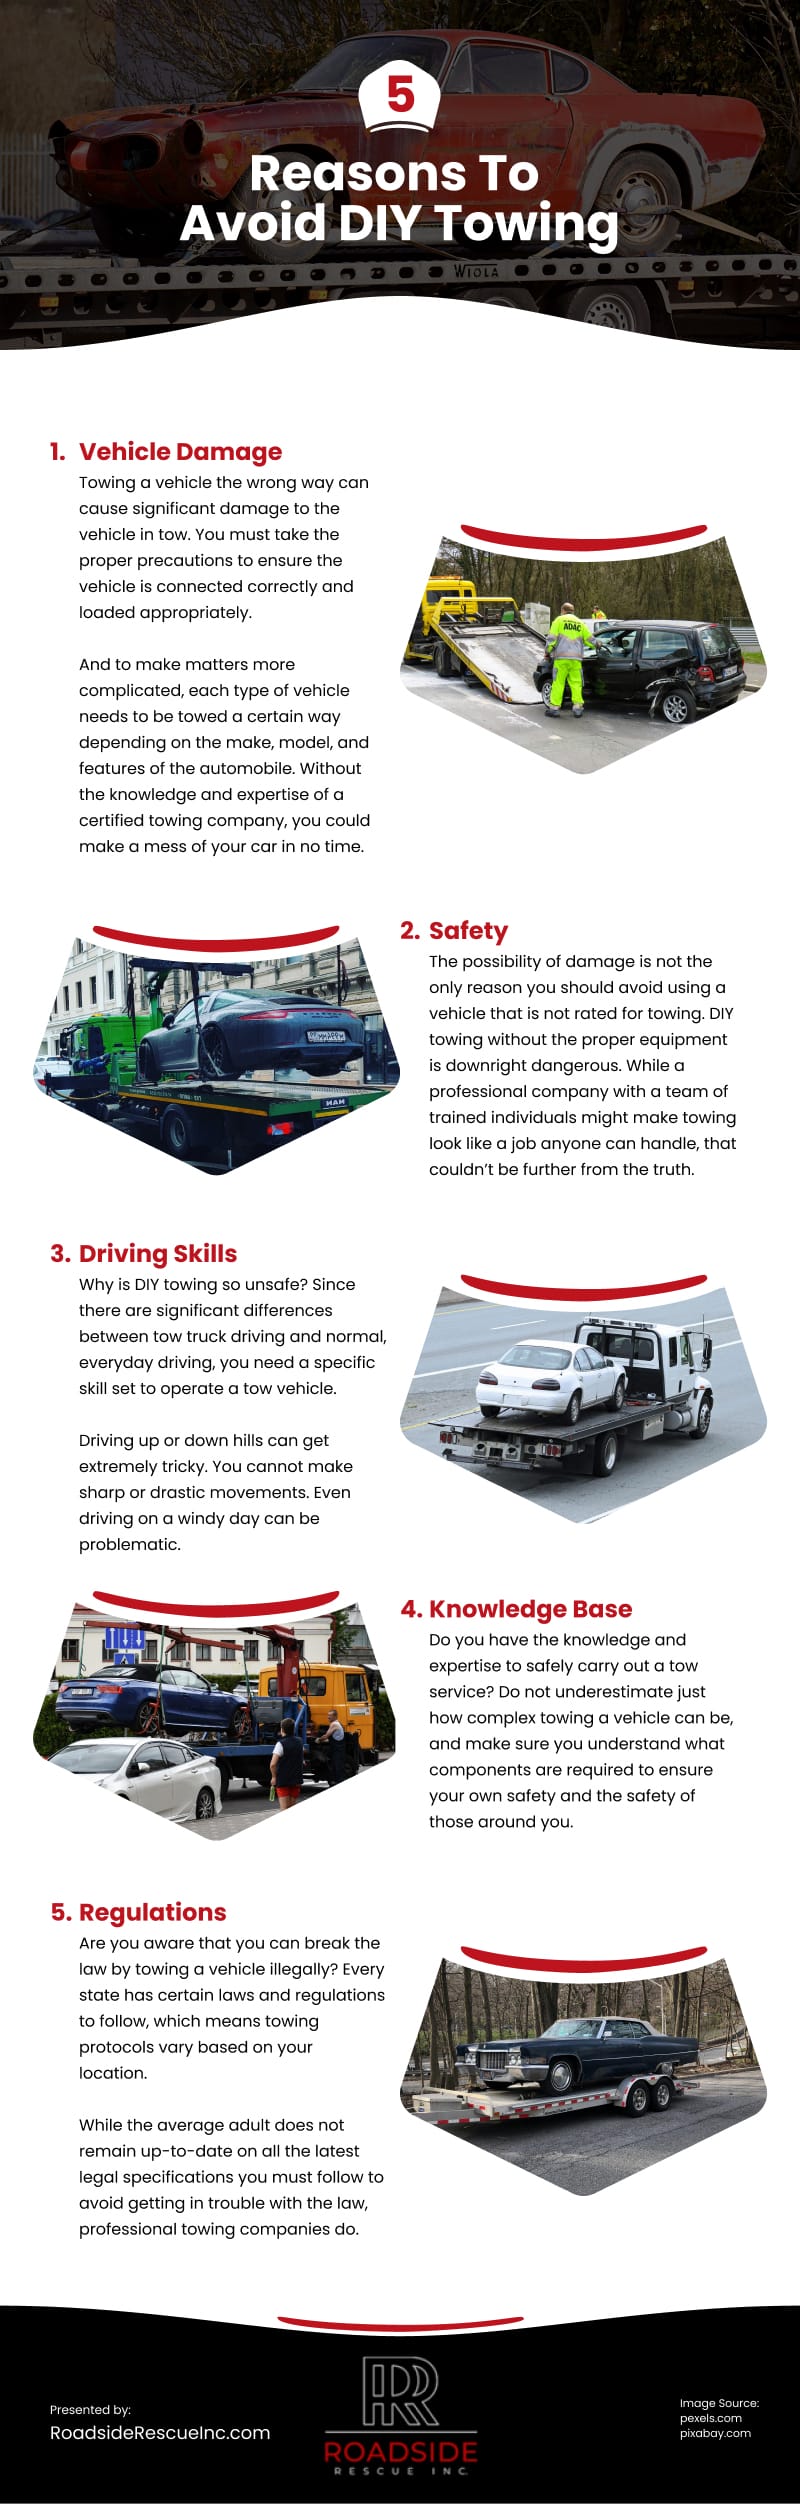 5 Reasons To Avoid DIY Towing Infographic